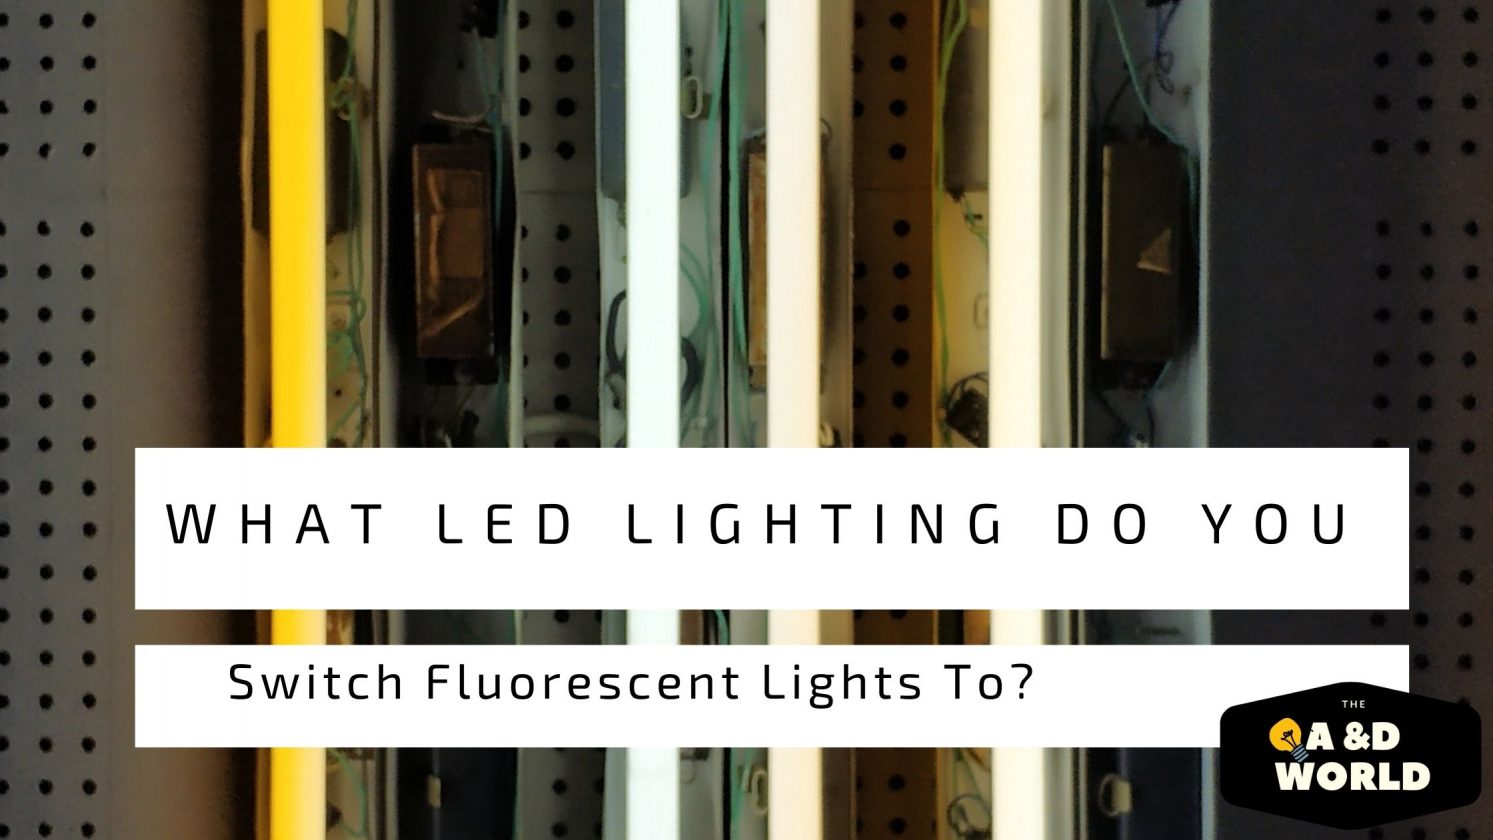 Switch Fluorescent Lights To?